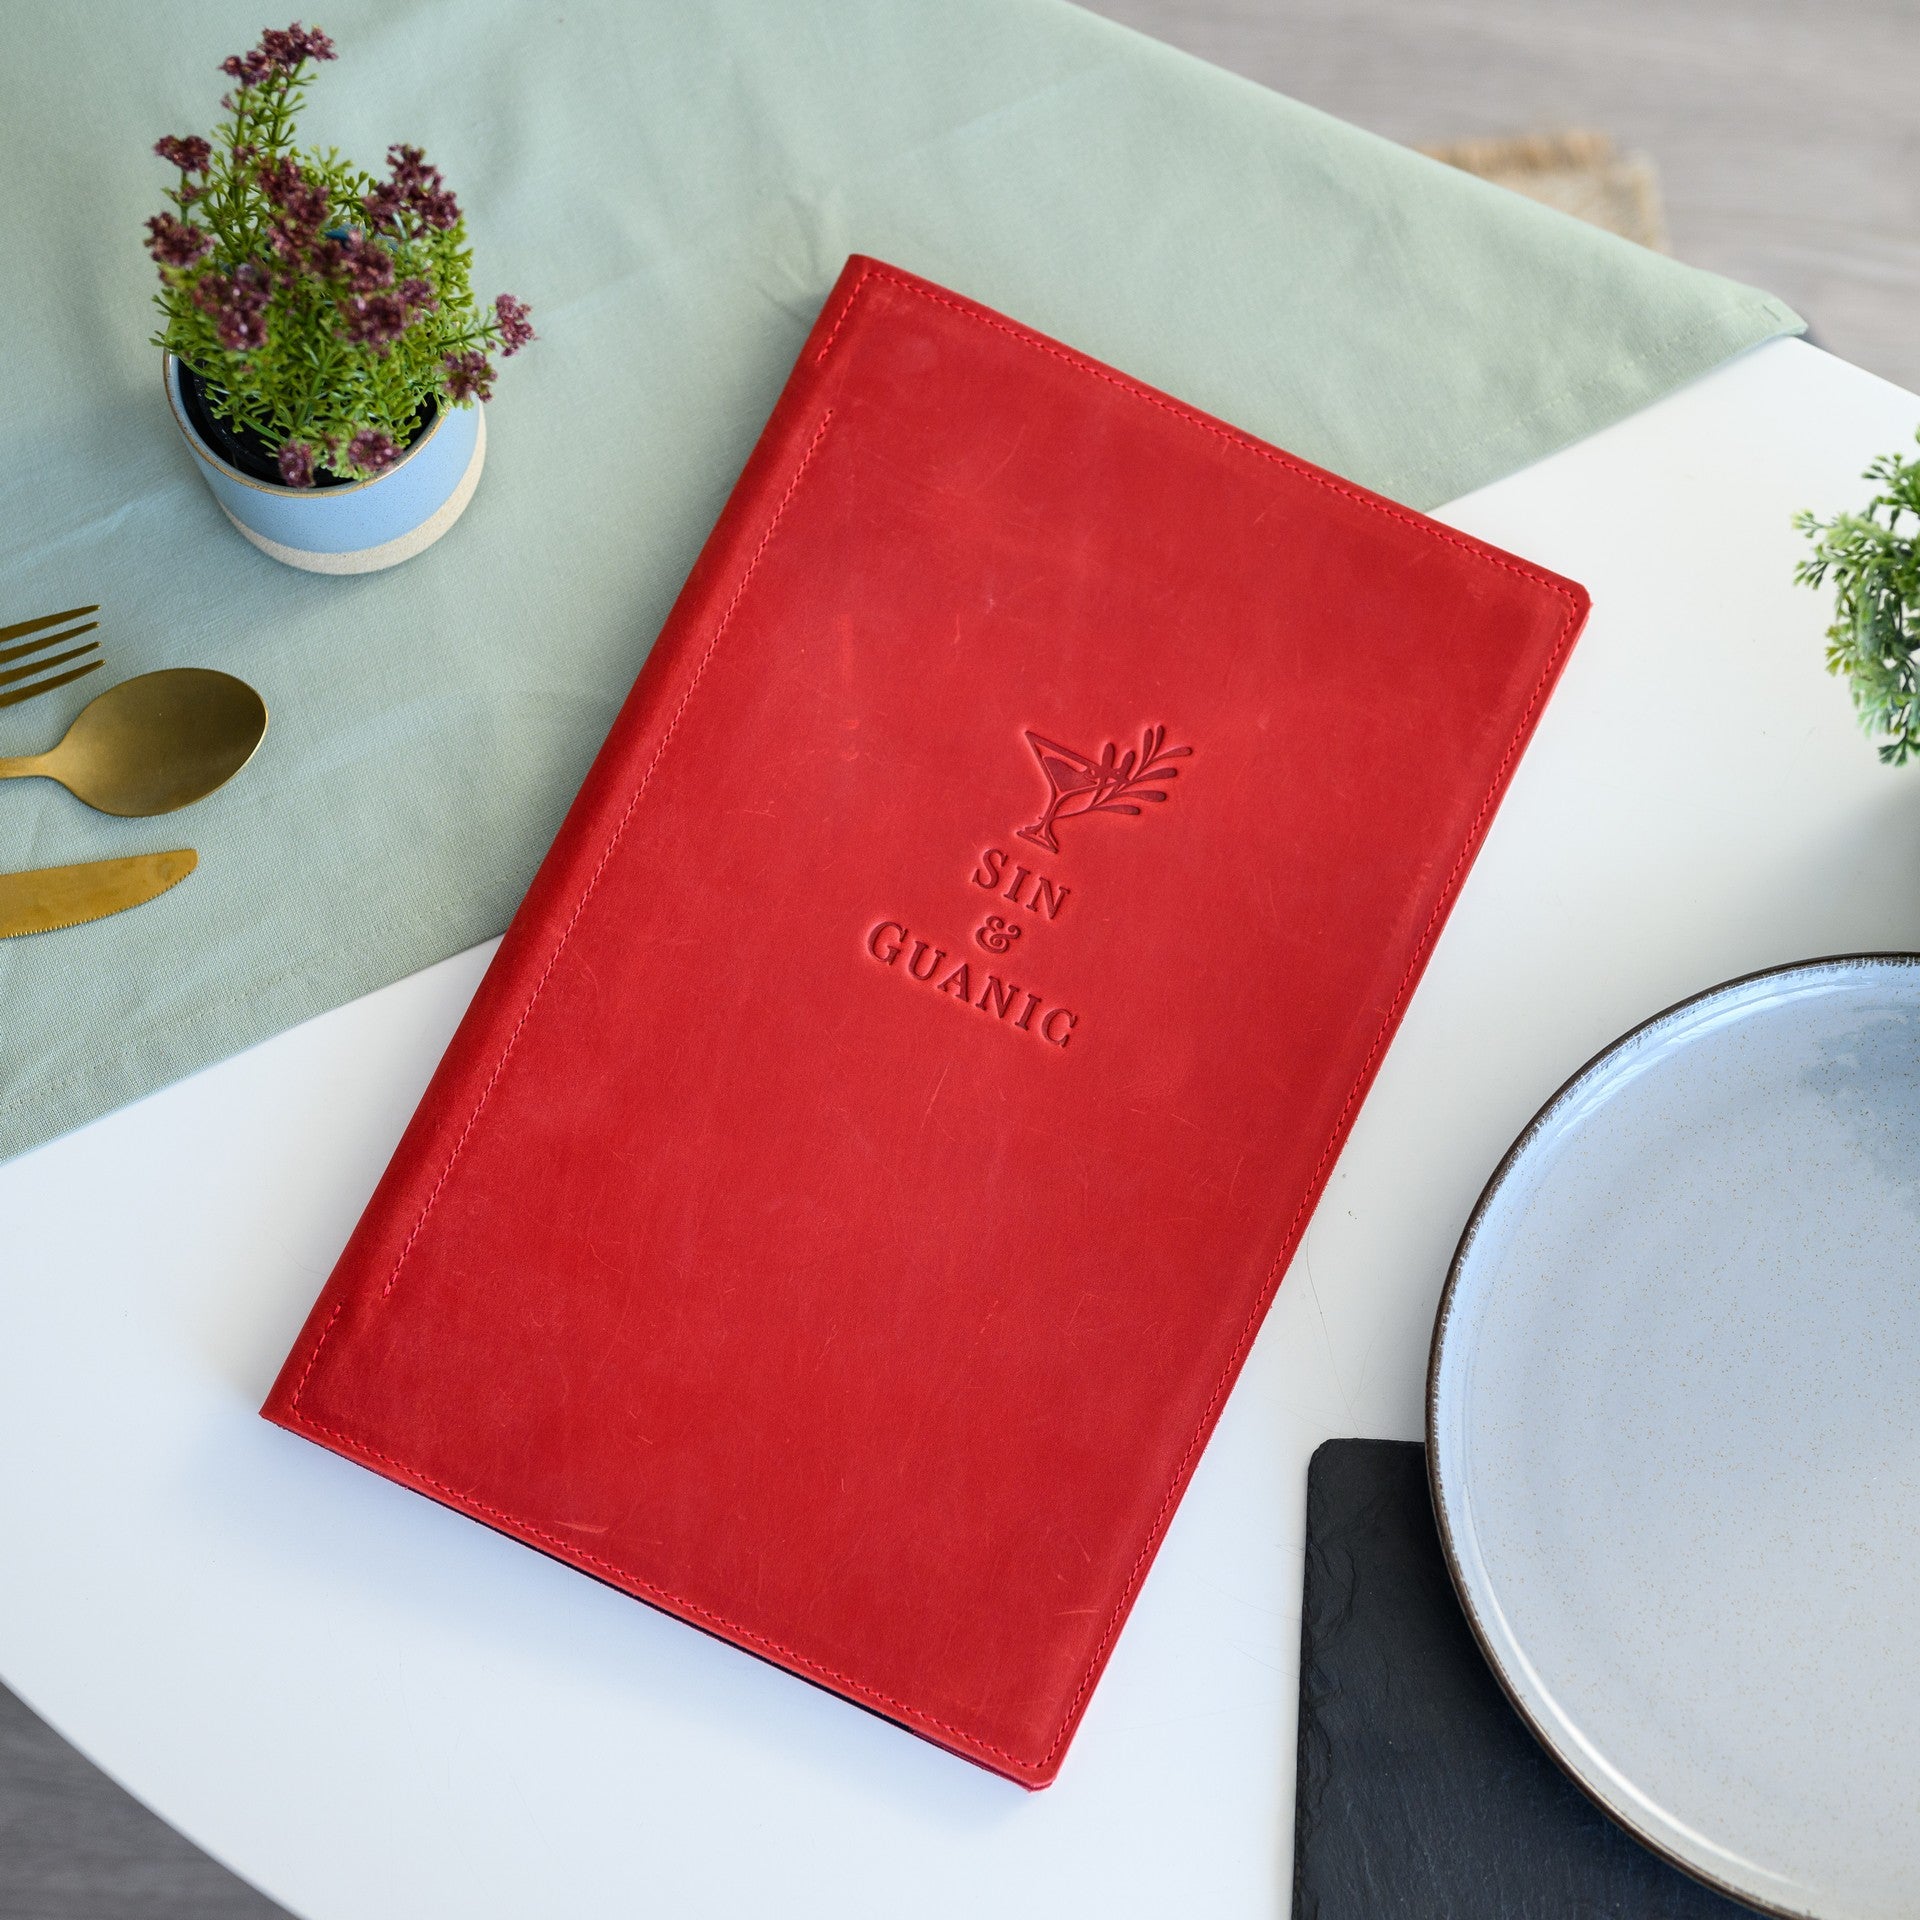 Timeless Leather Restaurant Menu Folder, providing a classic elegance to your dining experience.